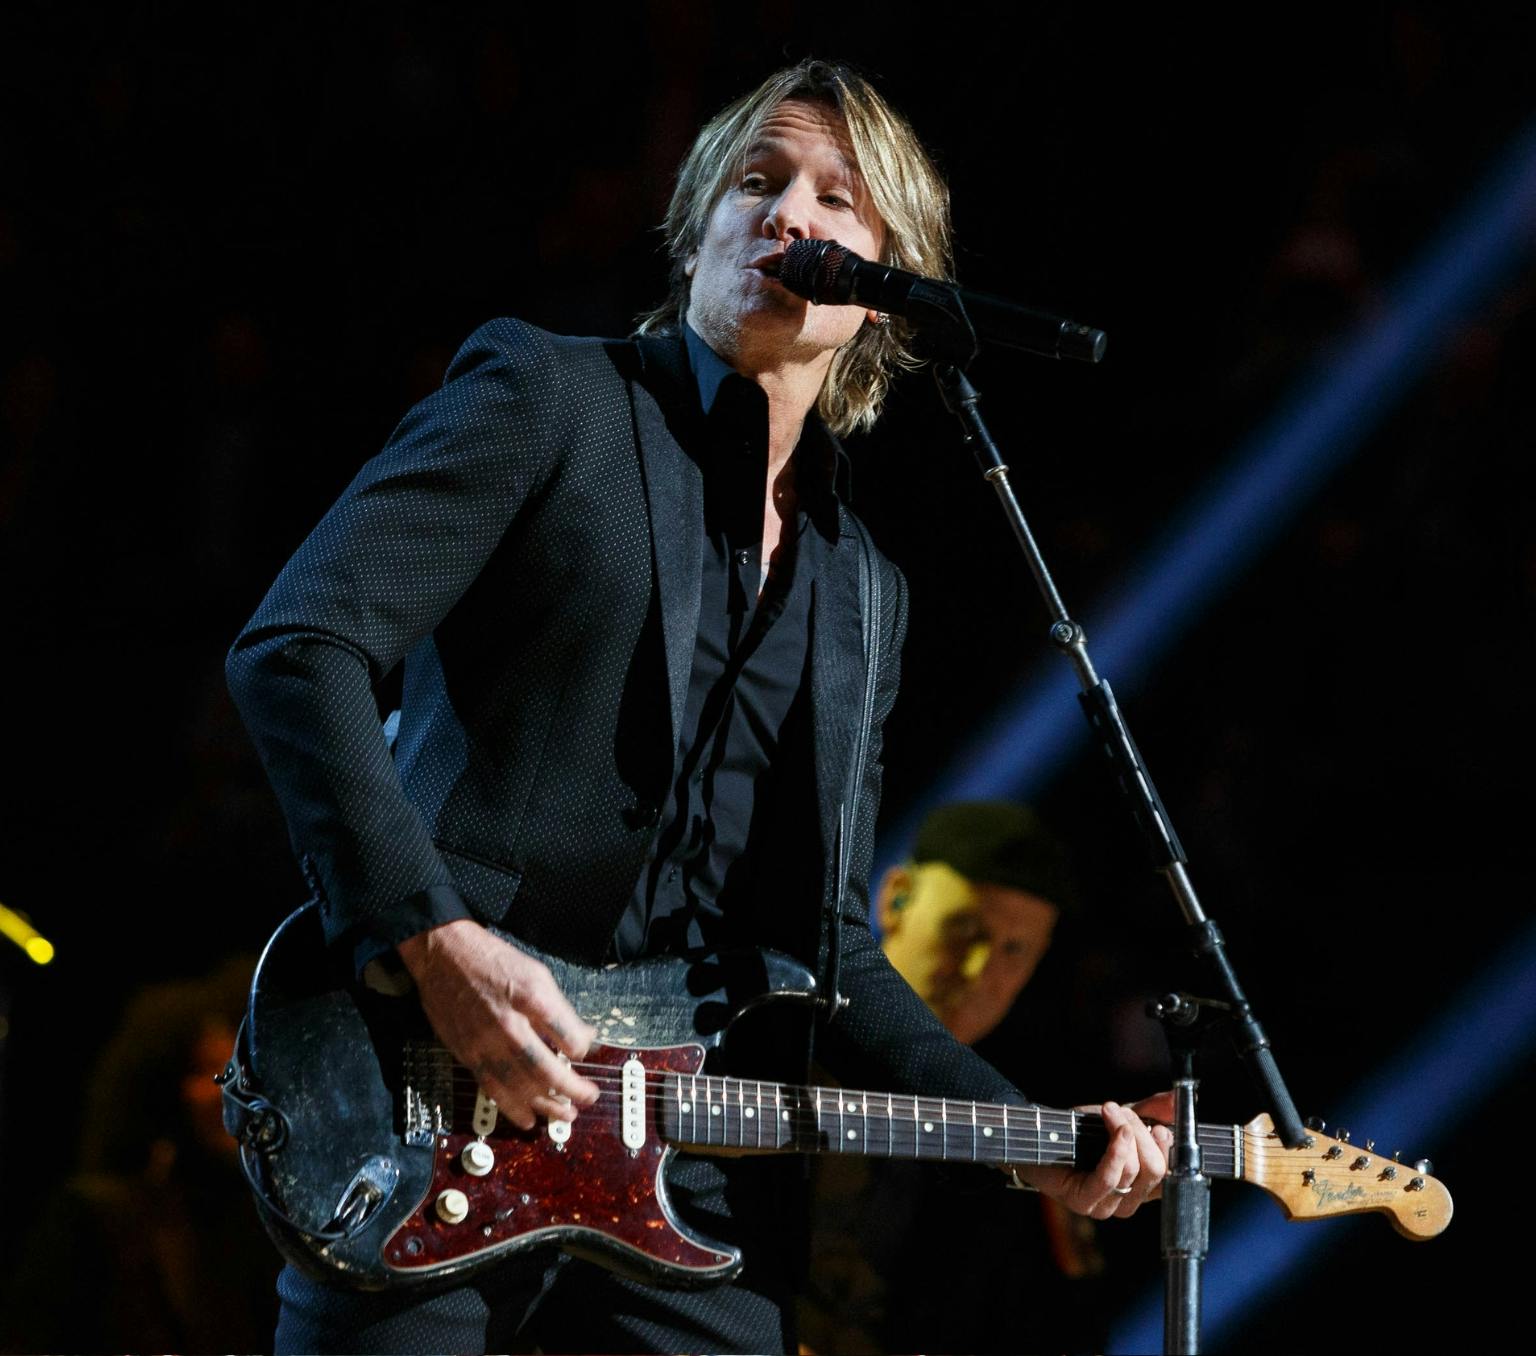 A man with medium length brown hair is playing a guitar while singing into a microphone. he is wearing a black suit and black shirt